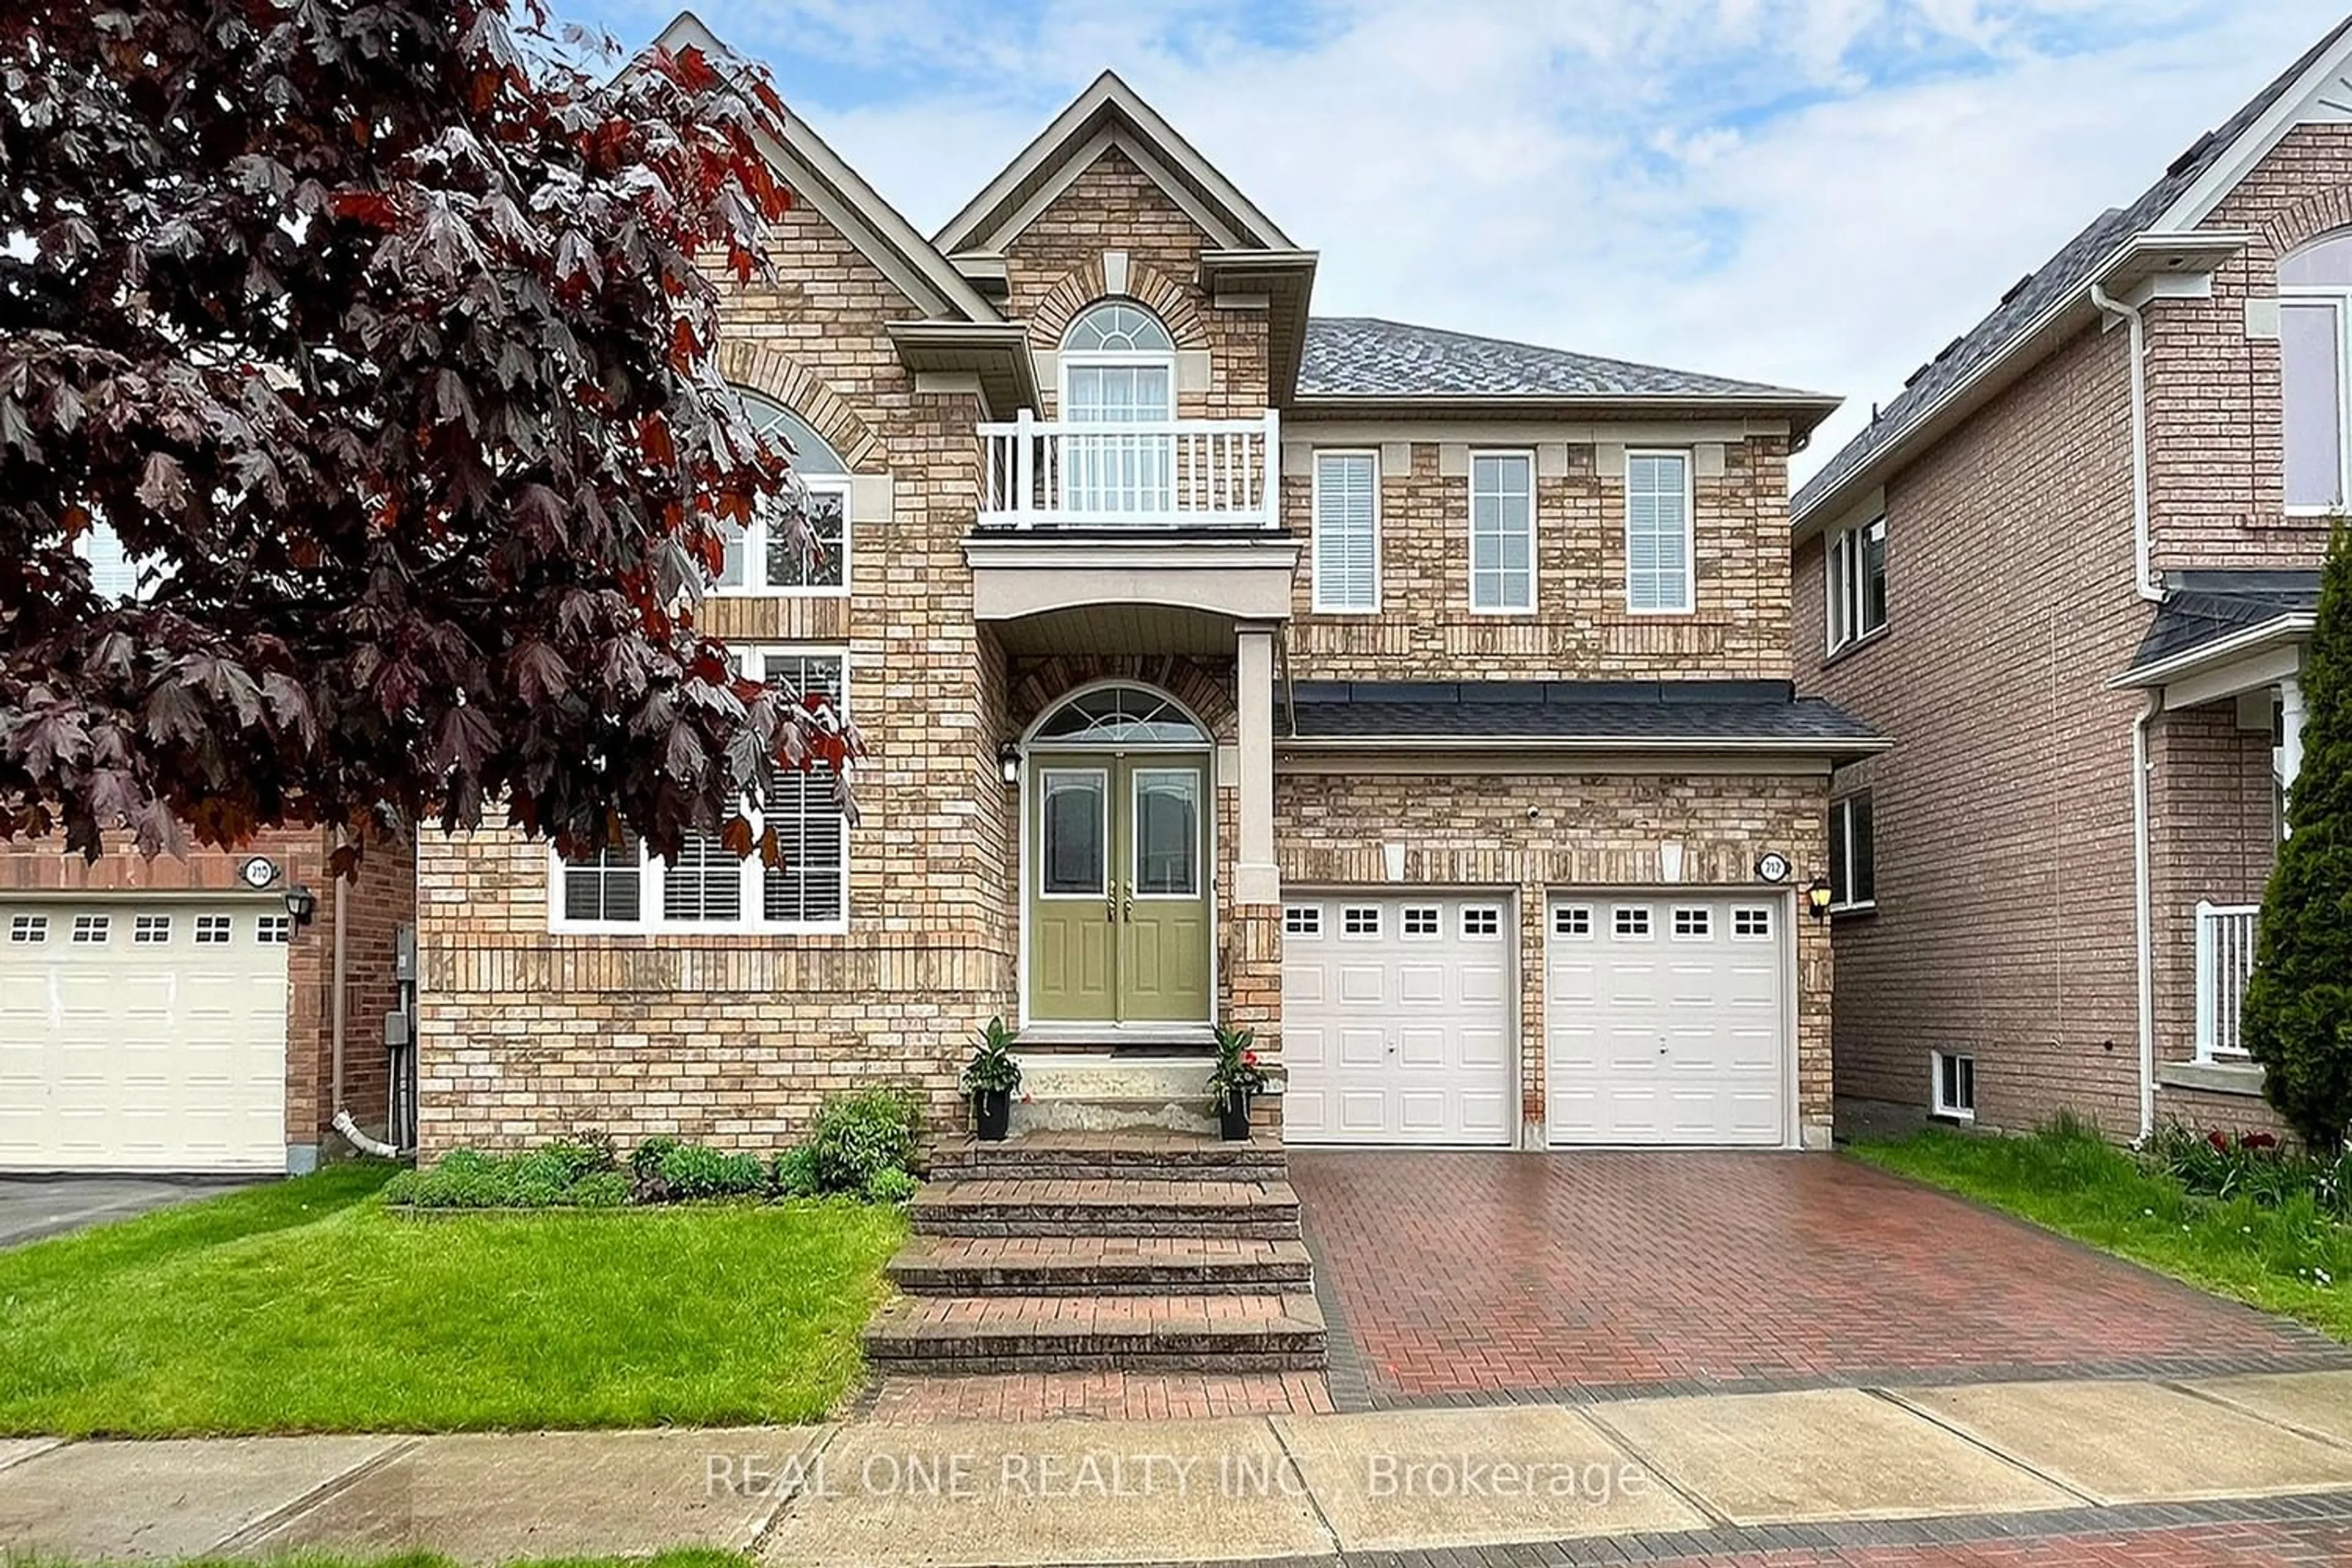 Home with brick exterior material for 712 The Bridle Walk, Markham Ontario L6C 2N4